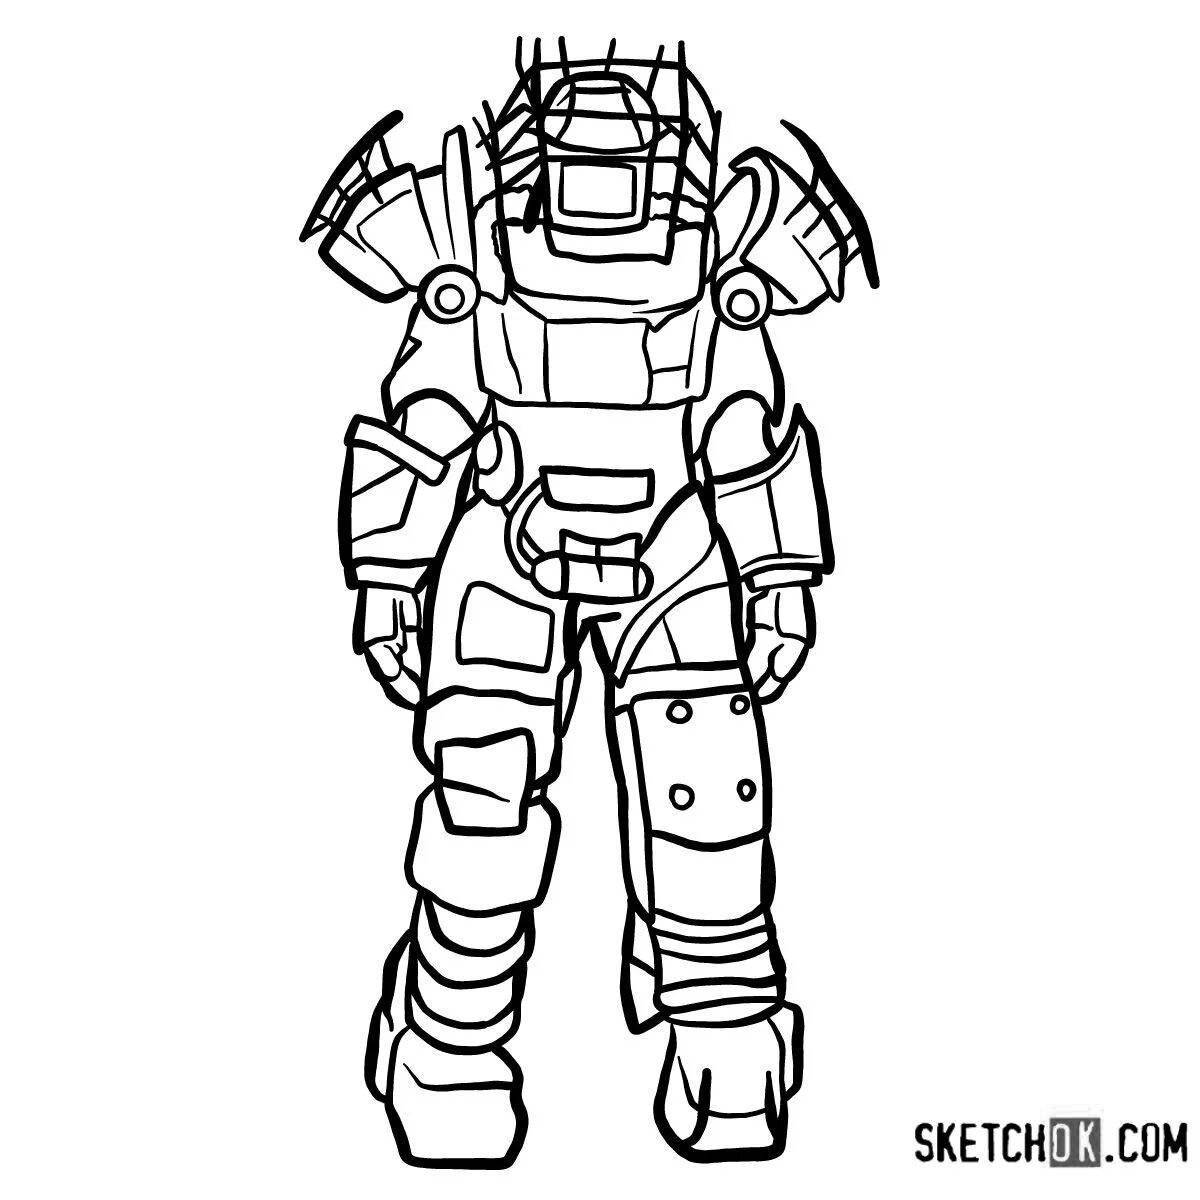 Attractive coloring of fallout 4 power armor